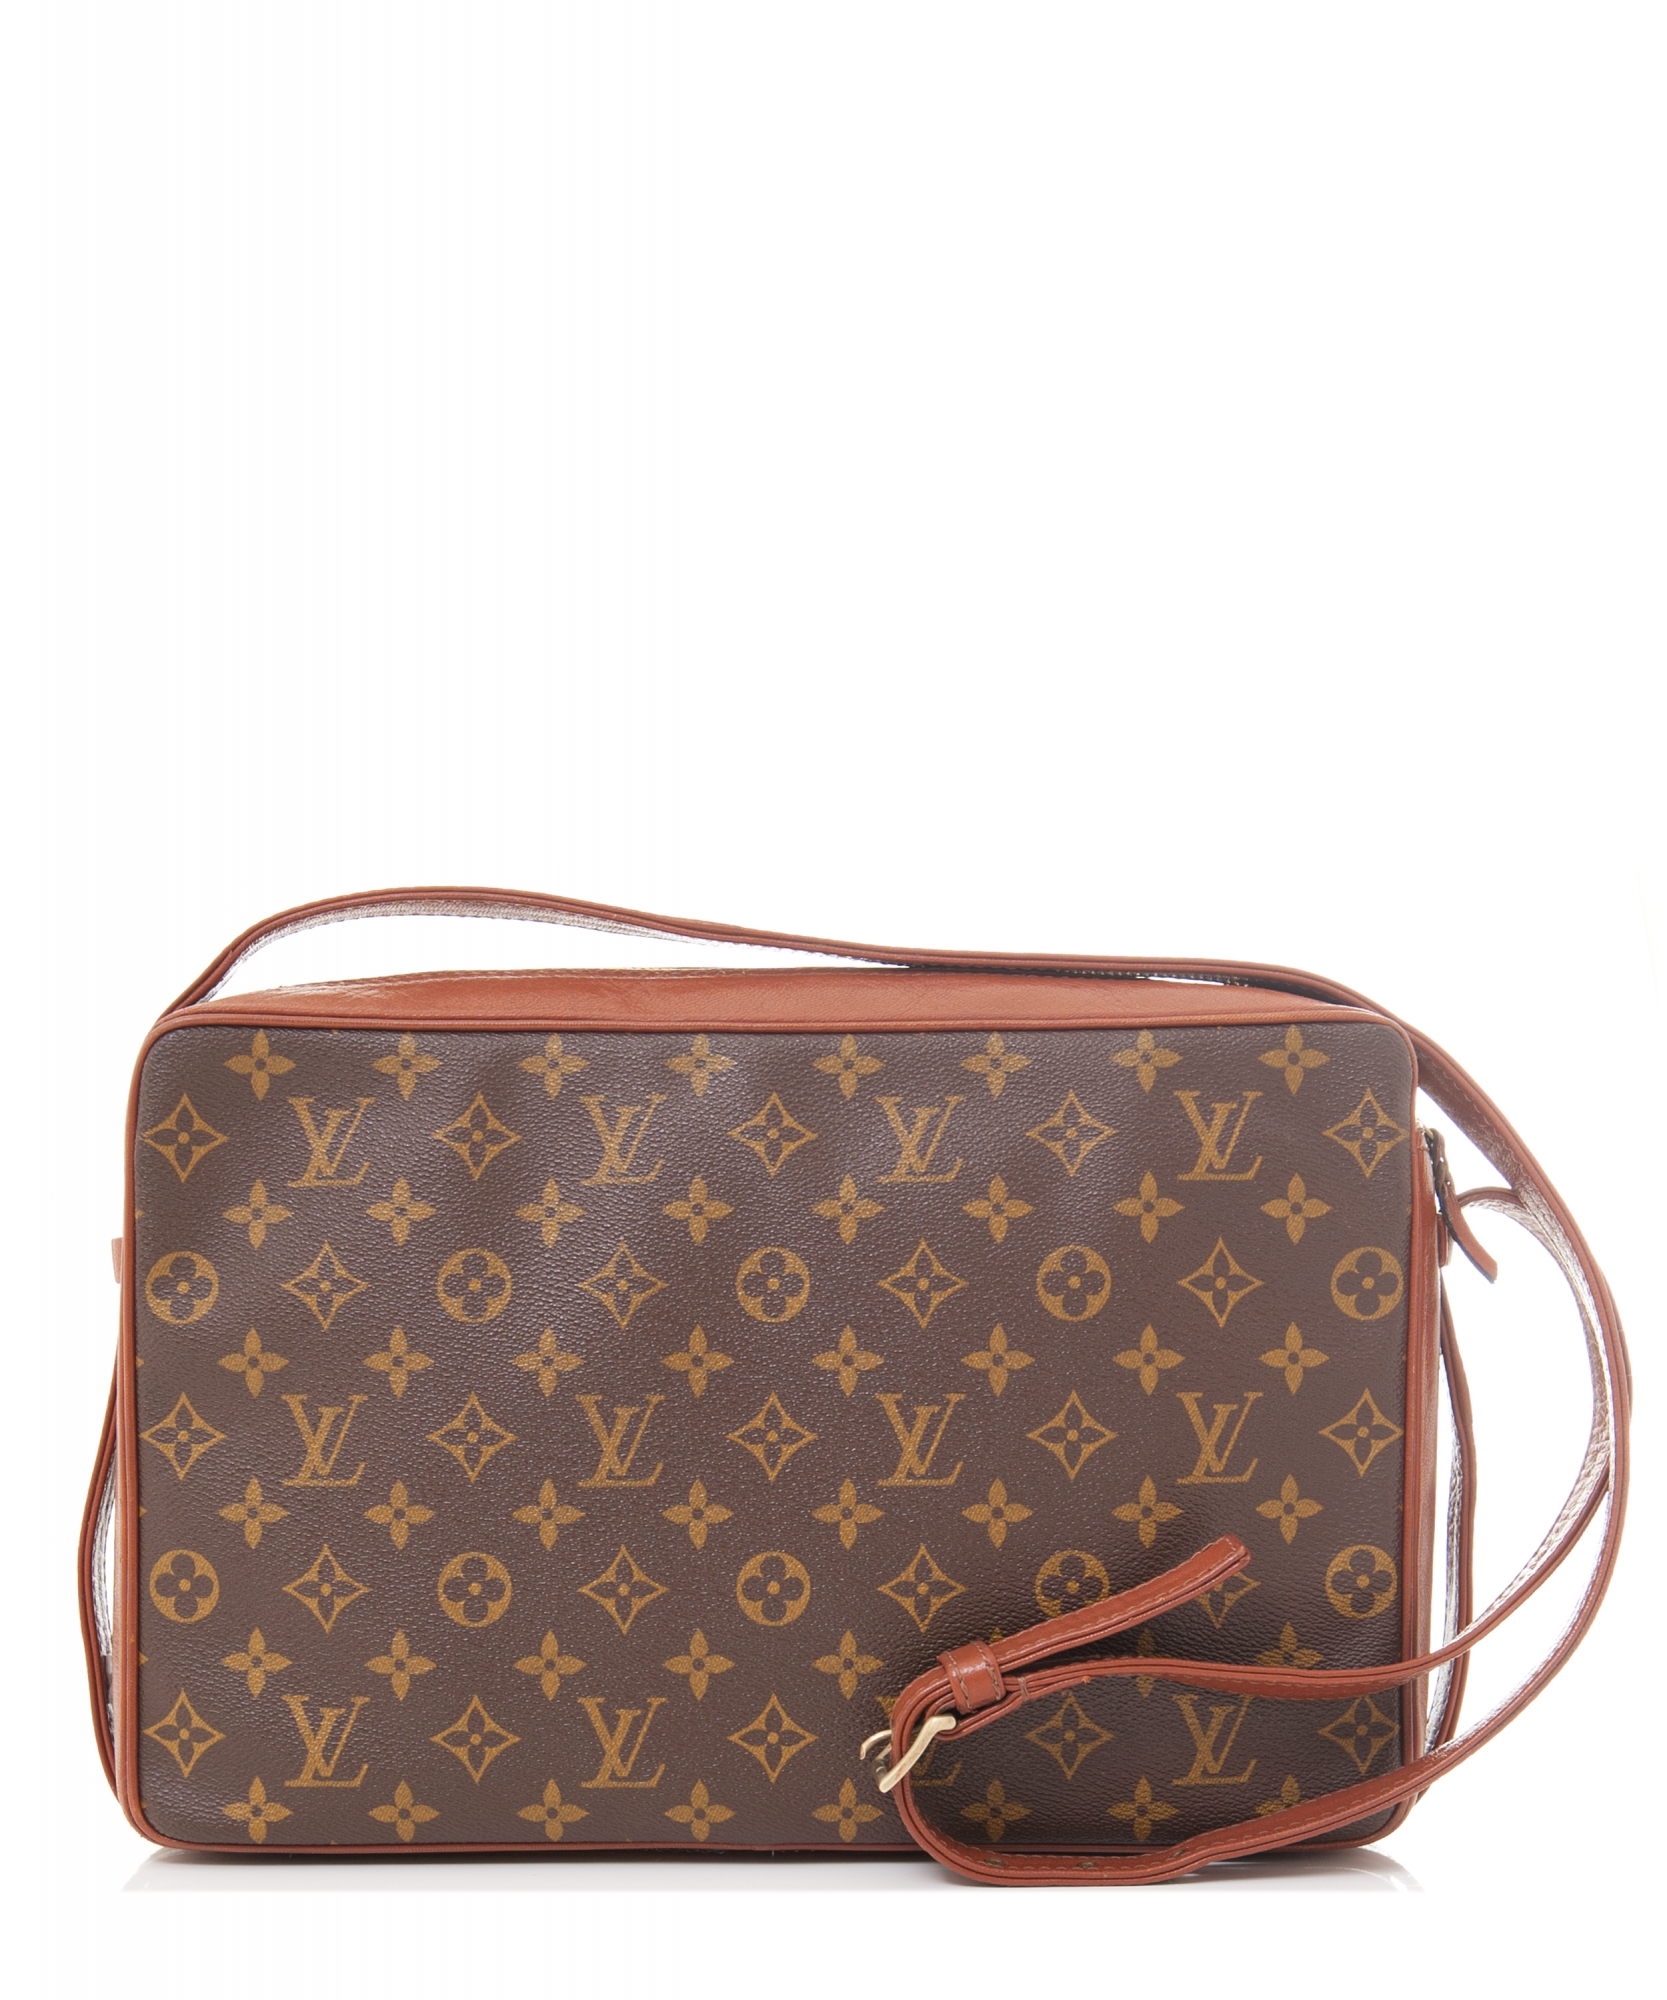 Louis Vuitton by The French Company Carry On Travel Bag Monogram Canvas  1970s